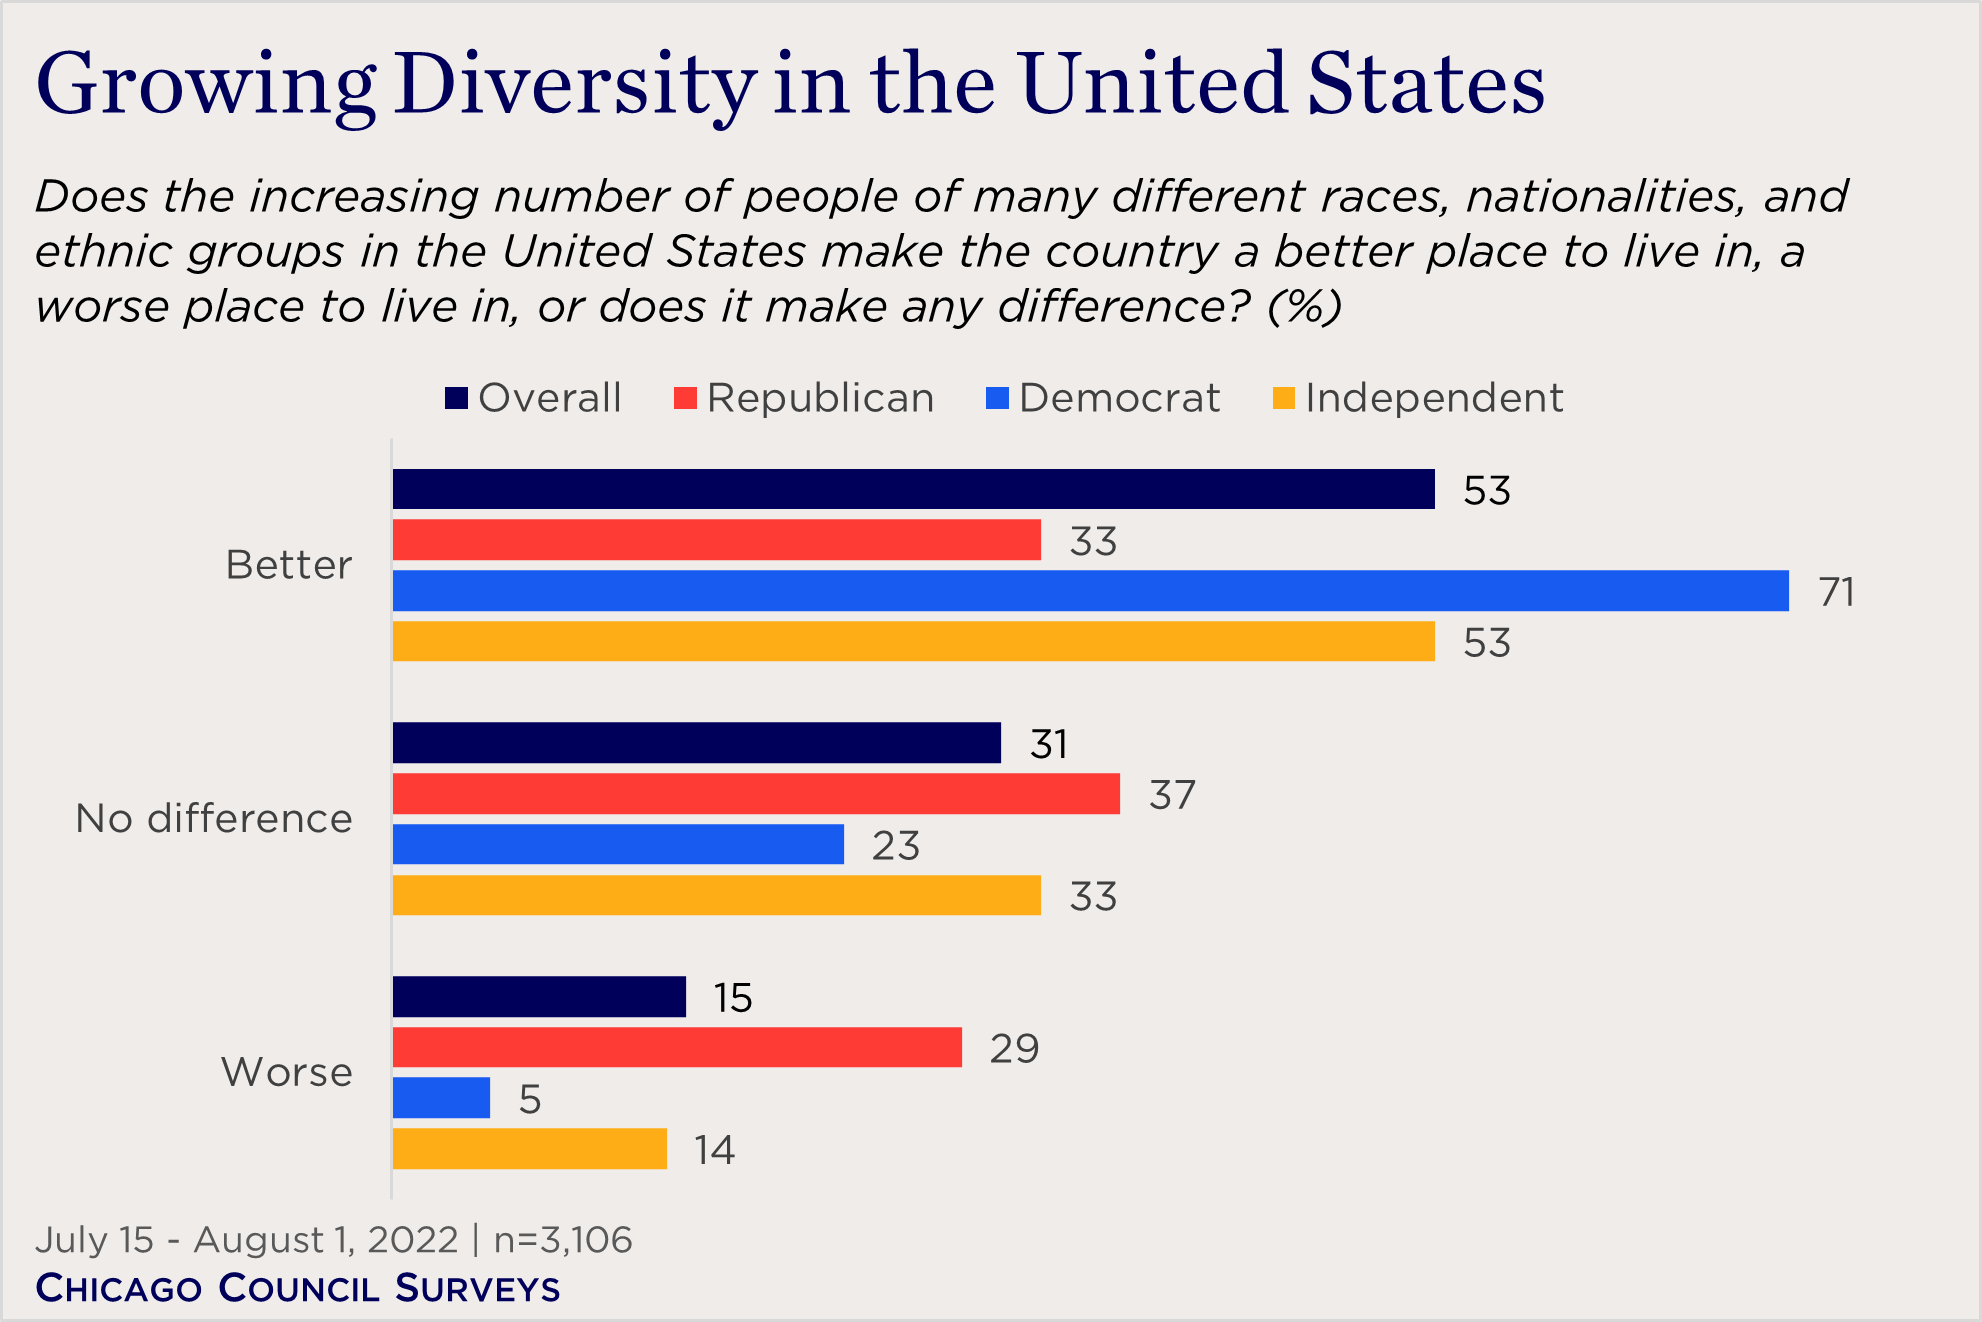 "bar chart showing partisan views of growing diversity in the United States"